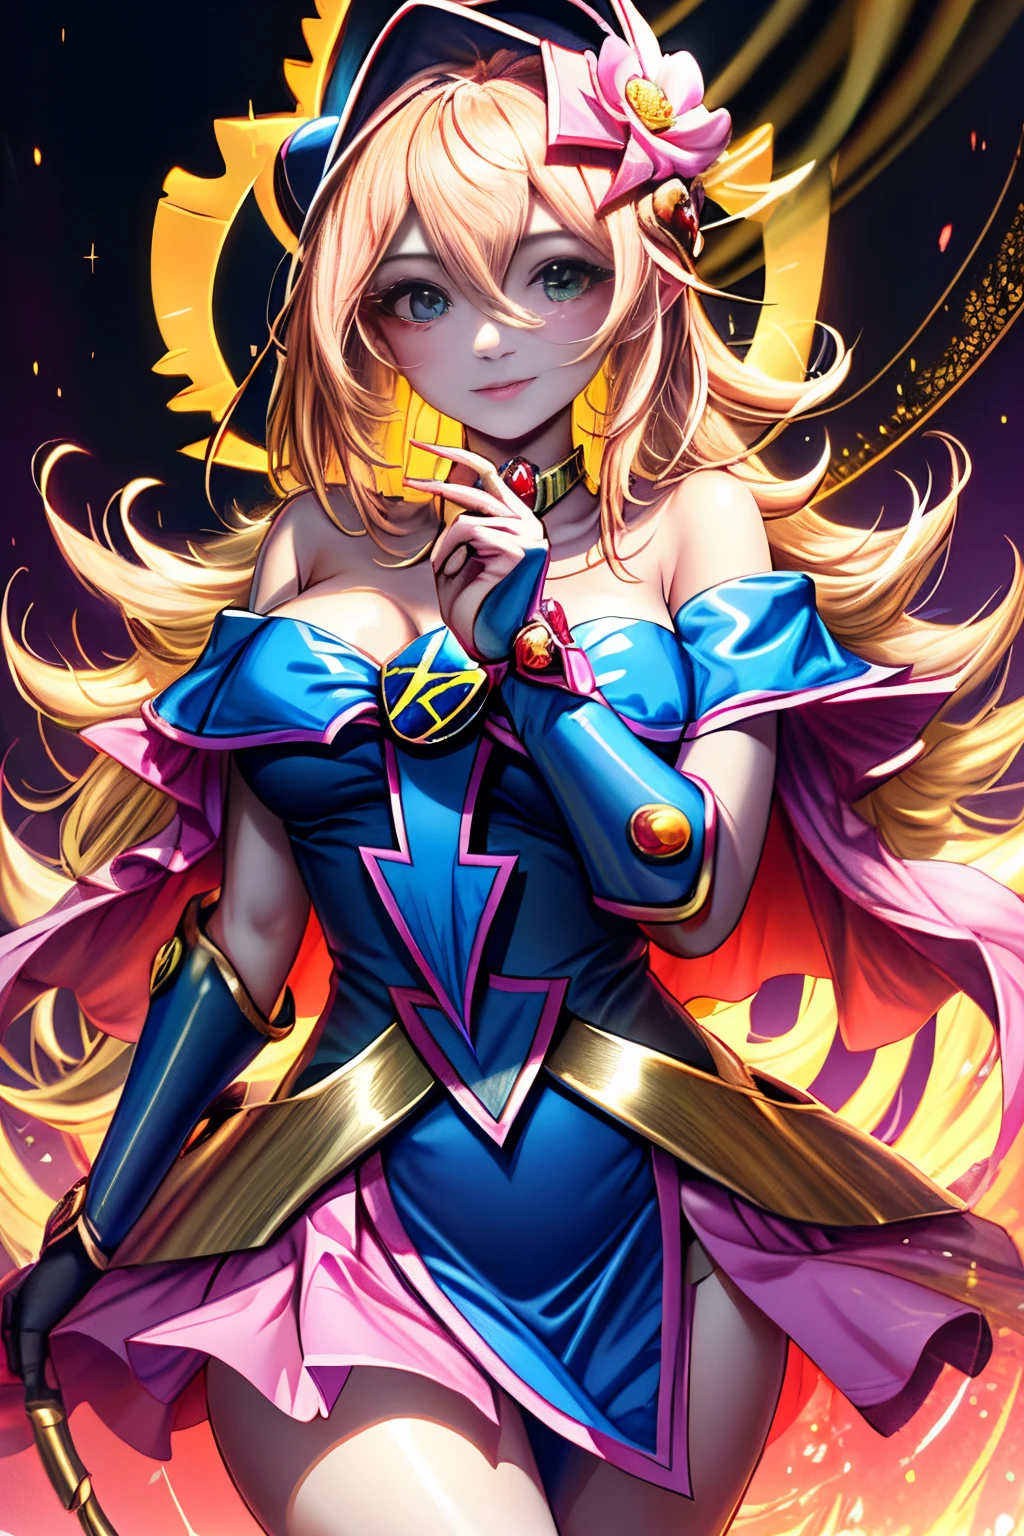 (tmasterpiece, Best Quality; 1.3), Extremely detailed CG, Ultra - detailed, 1 girl Black magician girl, only, smile, Looking at Viewert, elegant dogs, long golden hair, eBlue eyes,
SV1, Dark Magician Girl Uniform,  gloves on the elbow, hull, The sailors lead Rubio, red ribbons, orange necklace, white gloves, jewely, of the above,
multiple hearts, Face focus, Venus, tornado, Abstract backgrounds, heart storm, Hart&#39;s Lightning, heart bubbles, Heart balls, Halt Star, heart flower, heart light, The world of the heart, heartbackground, Galaxy Background, Heart weapons, The halo of the heart, magic. Black magician girl is hot